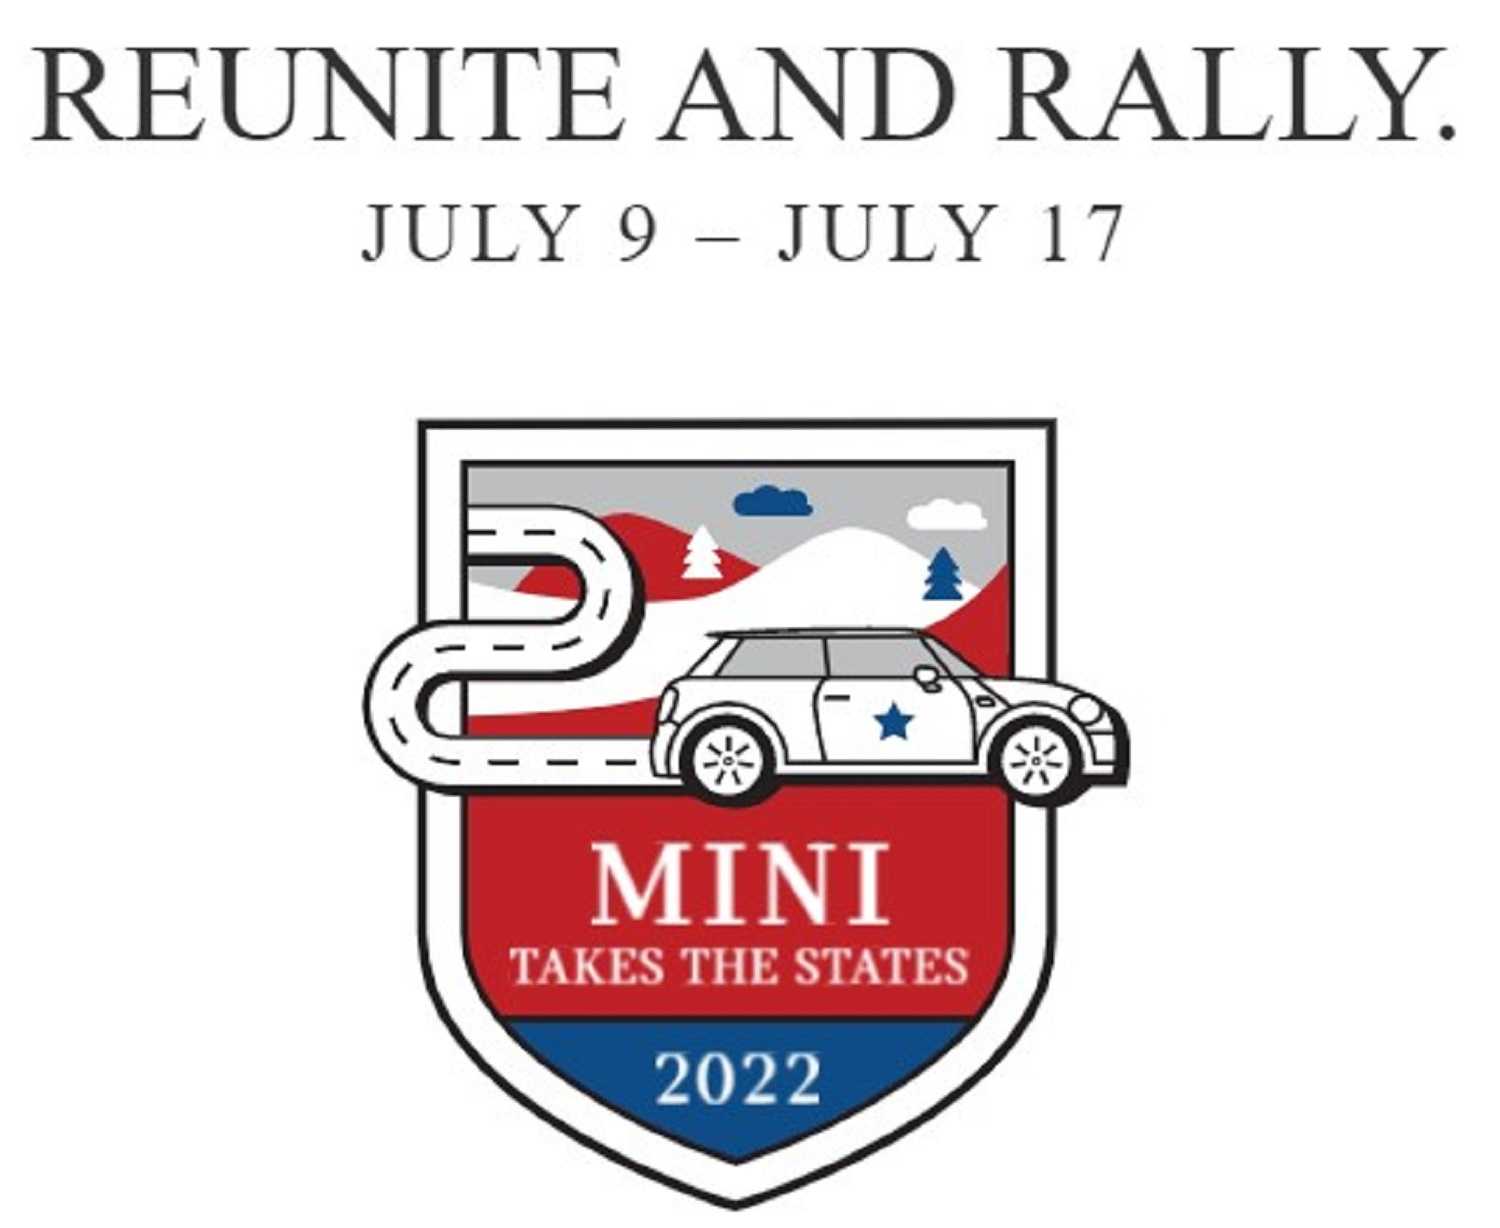 MINI USA CONFIRMS MINI TAKES THE STATES, ANNOUNCING OFFICIAL ROUTE FOR